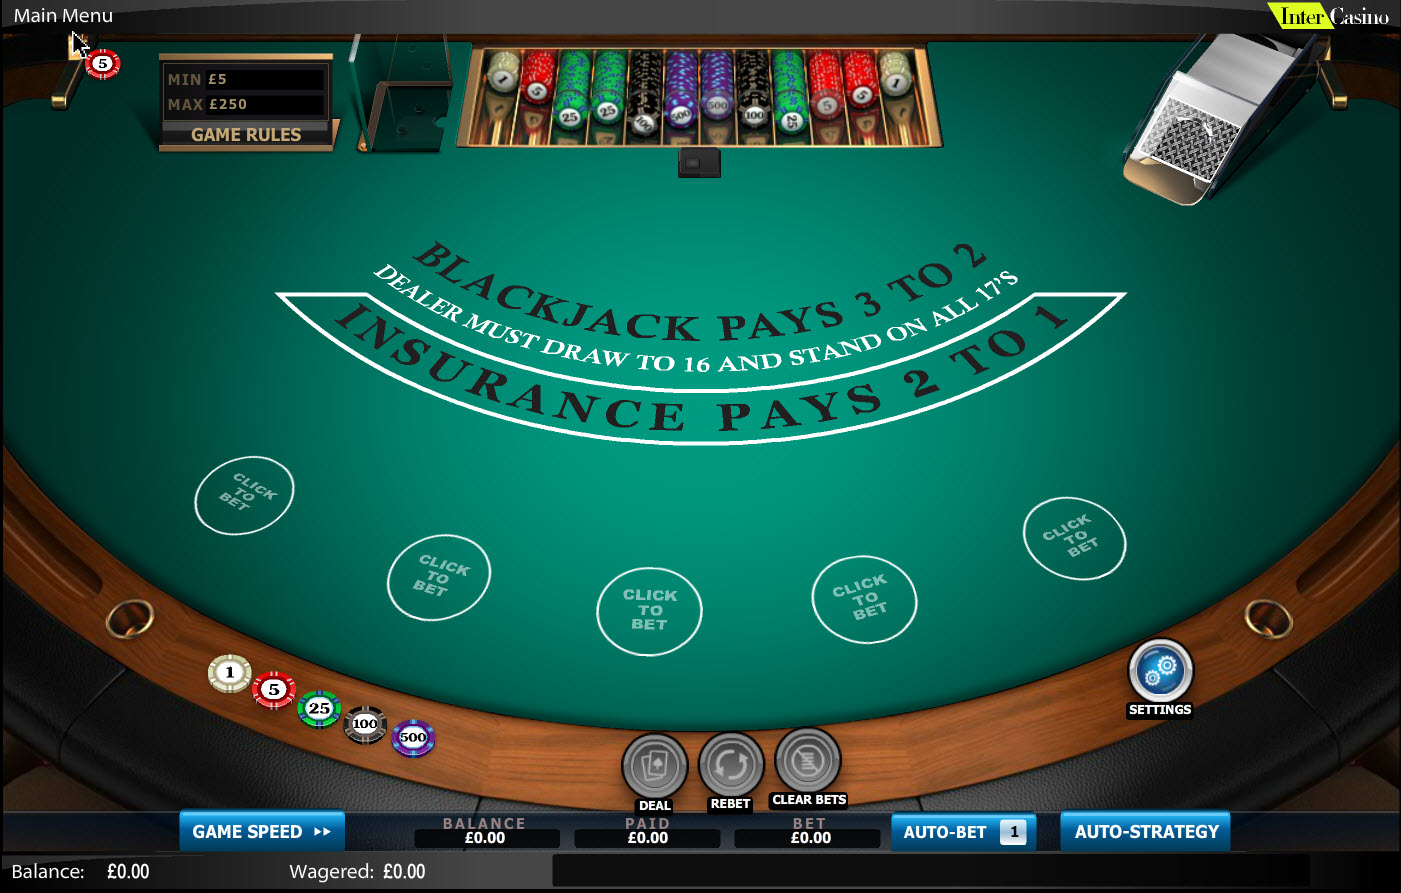 The very best of Both Worlds – Classic and Online Casinos at Your Disposal